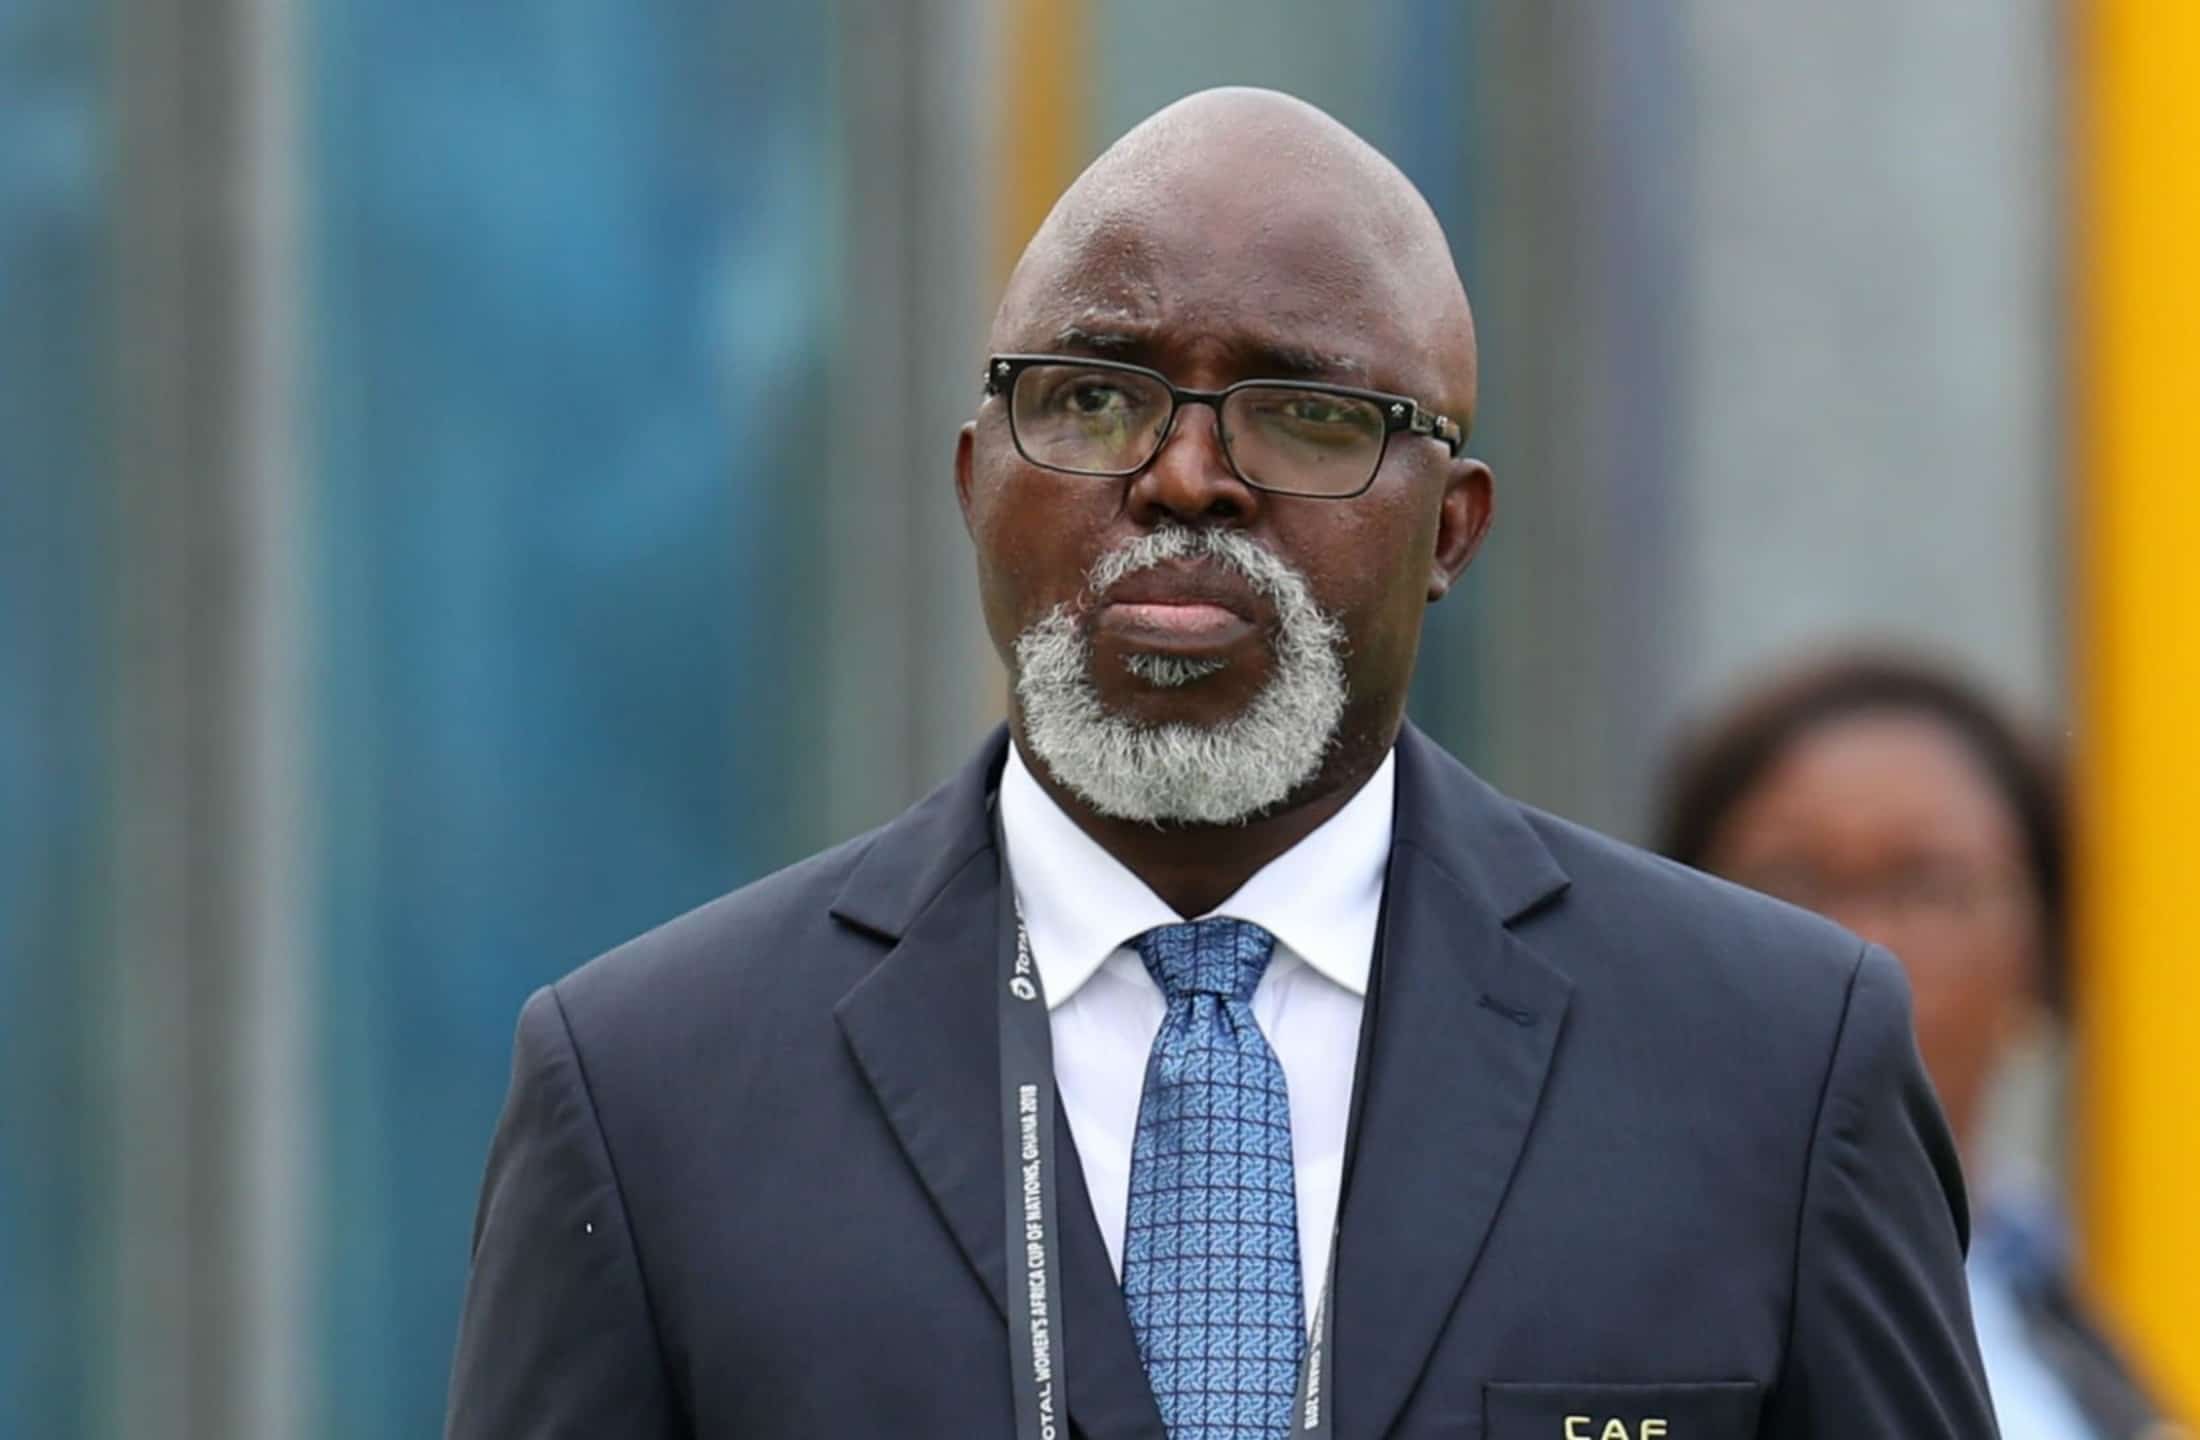 Pinnick soldier nff president